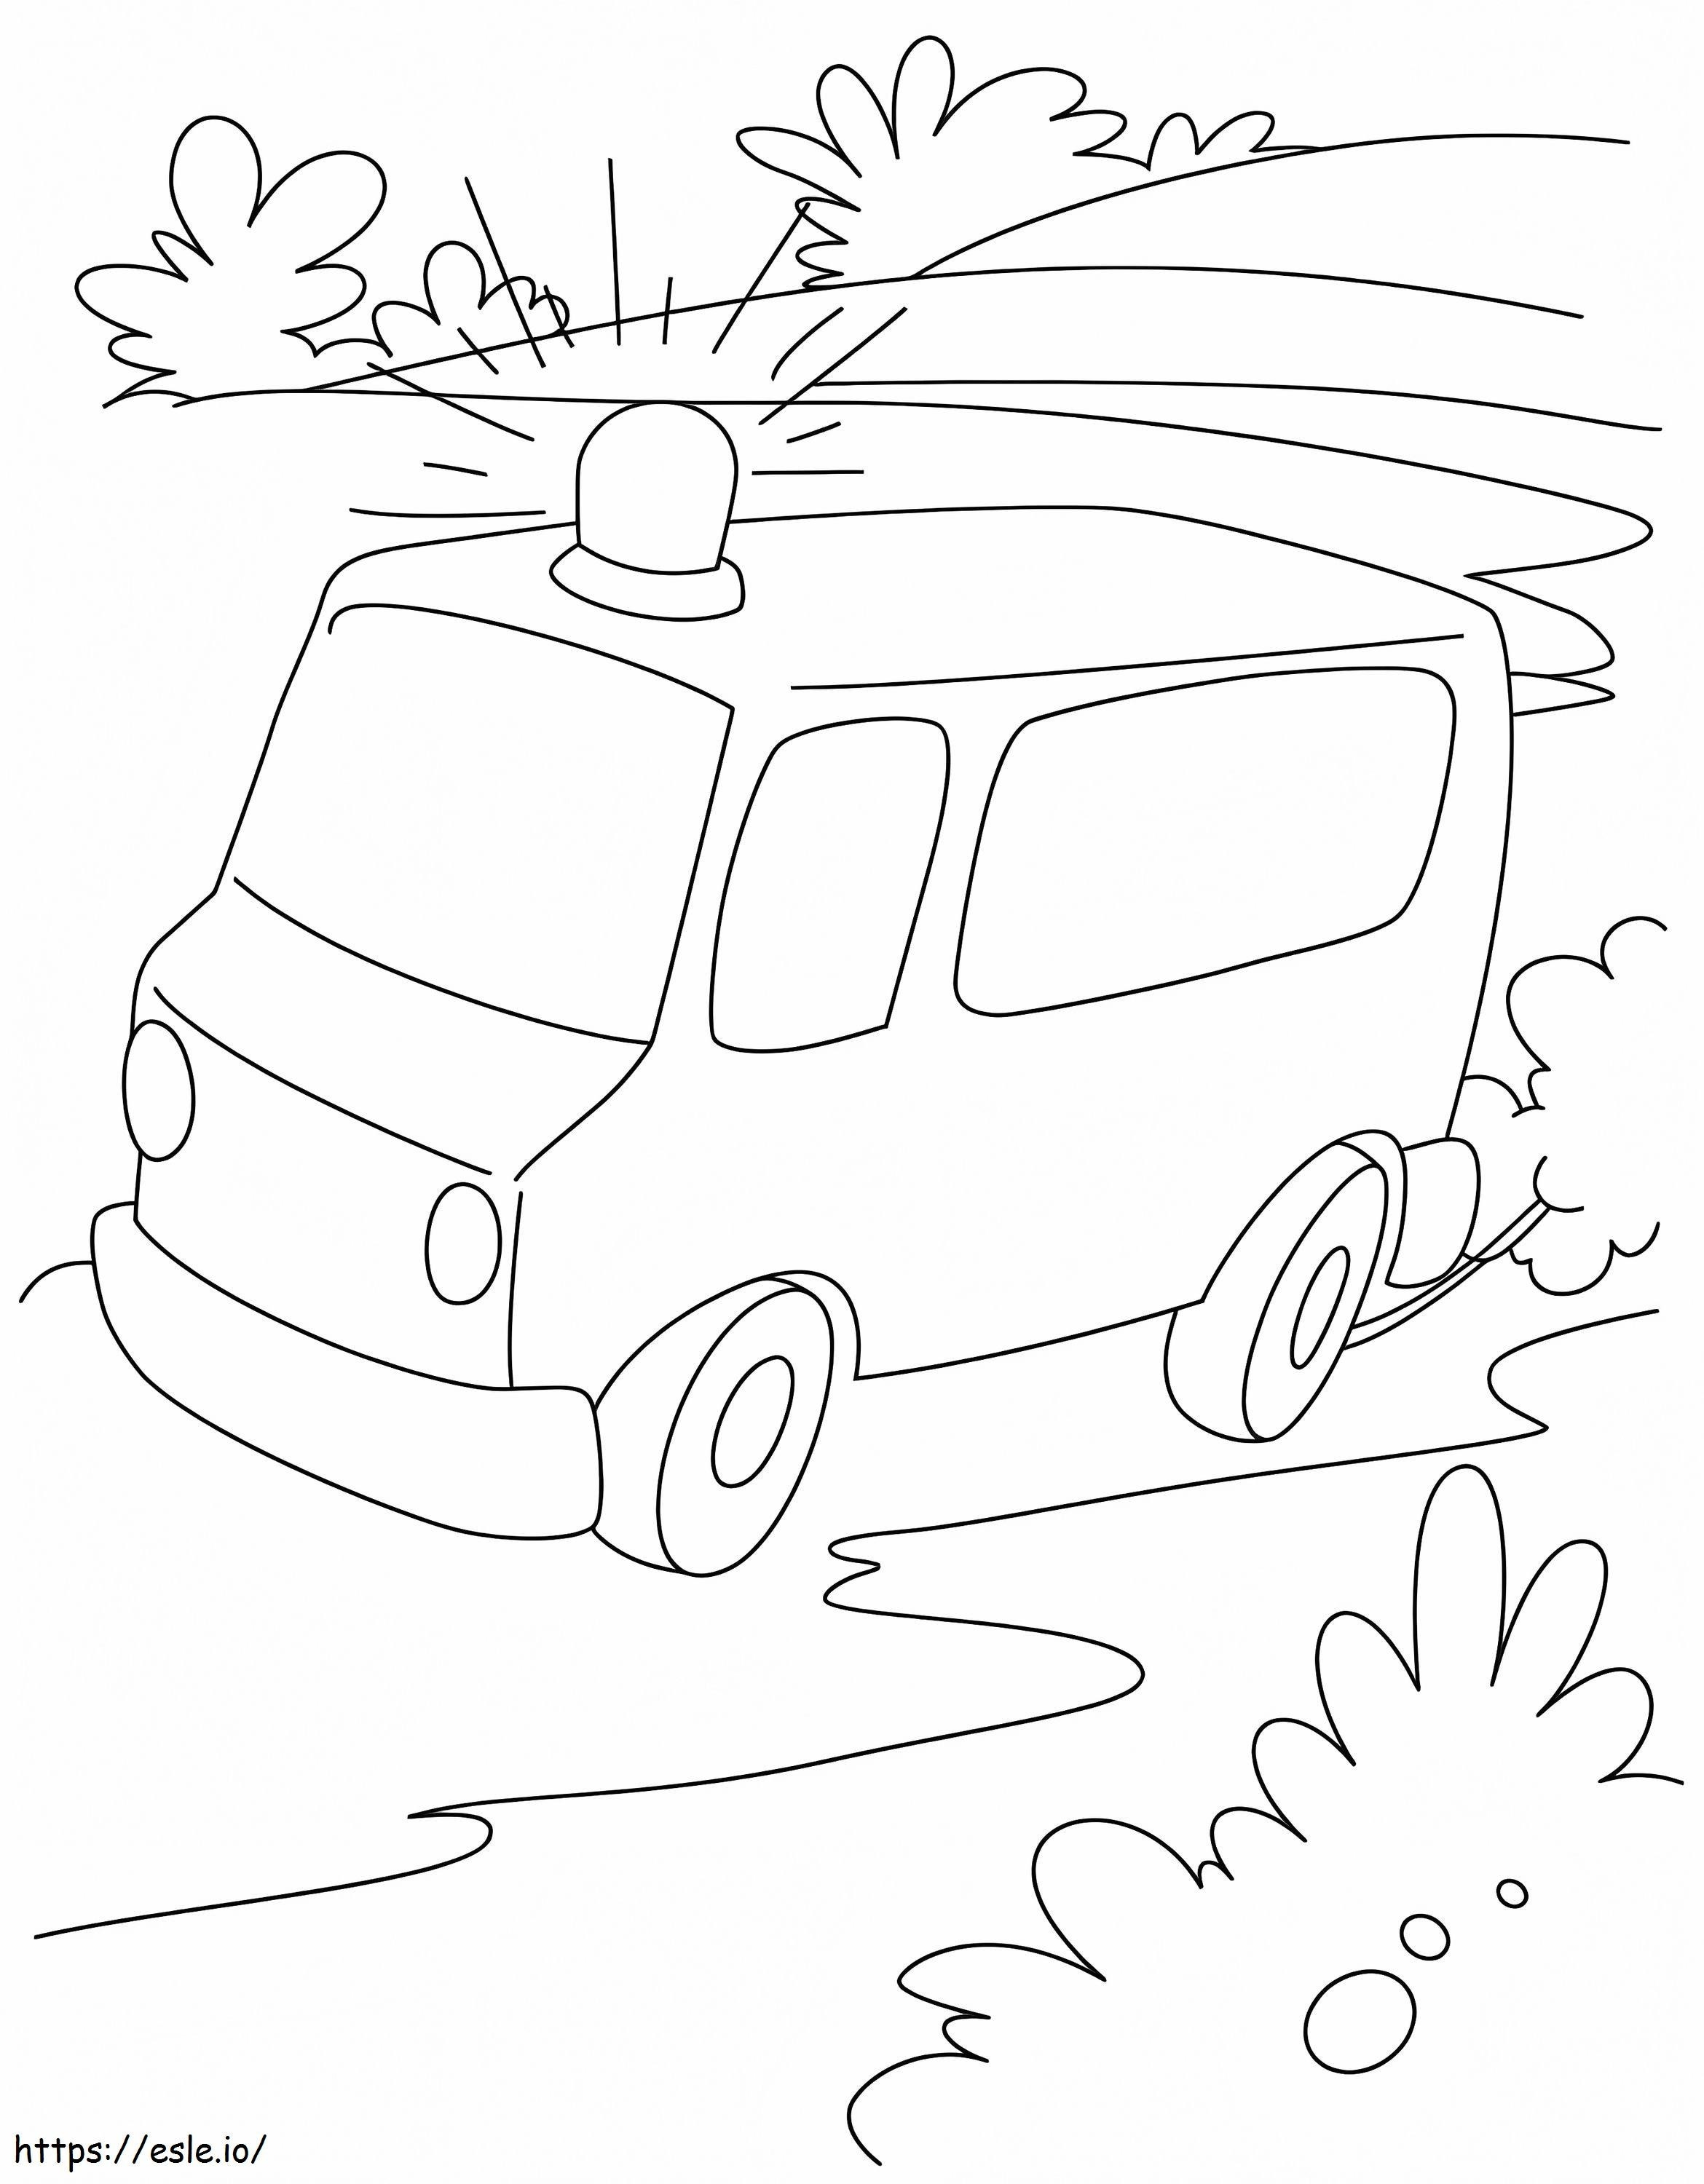 Ambulance Vehicles Are In Emergency Situations coloring page